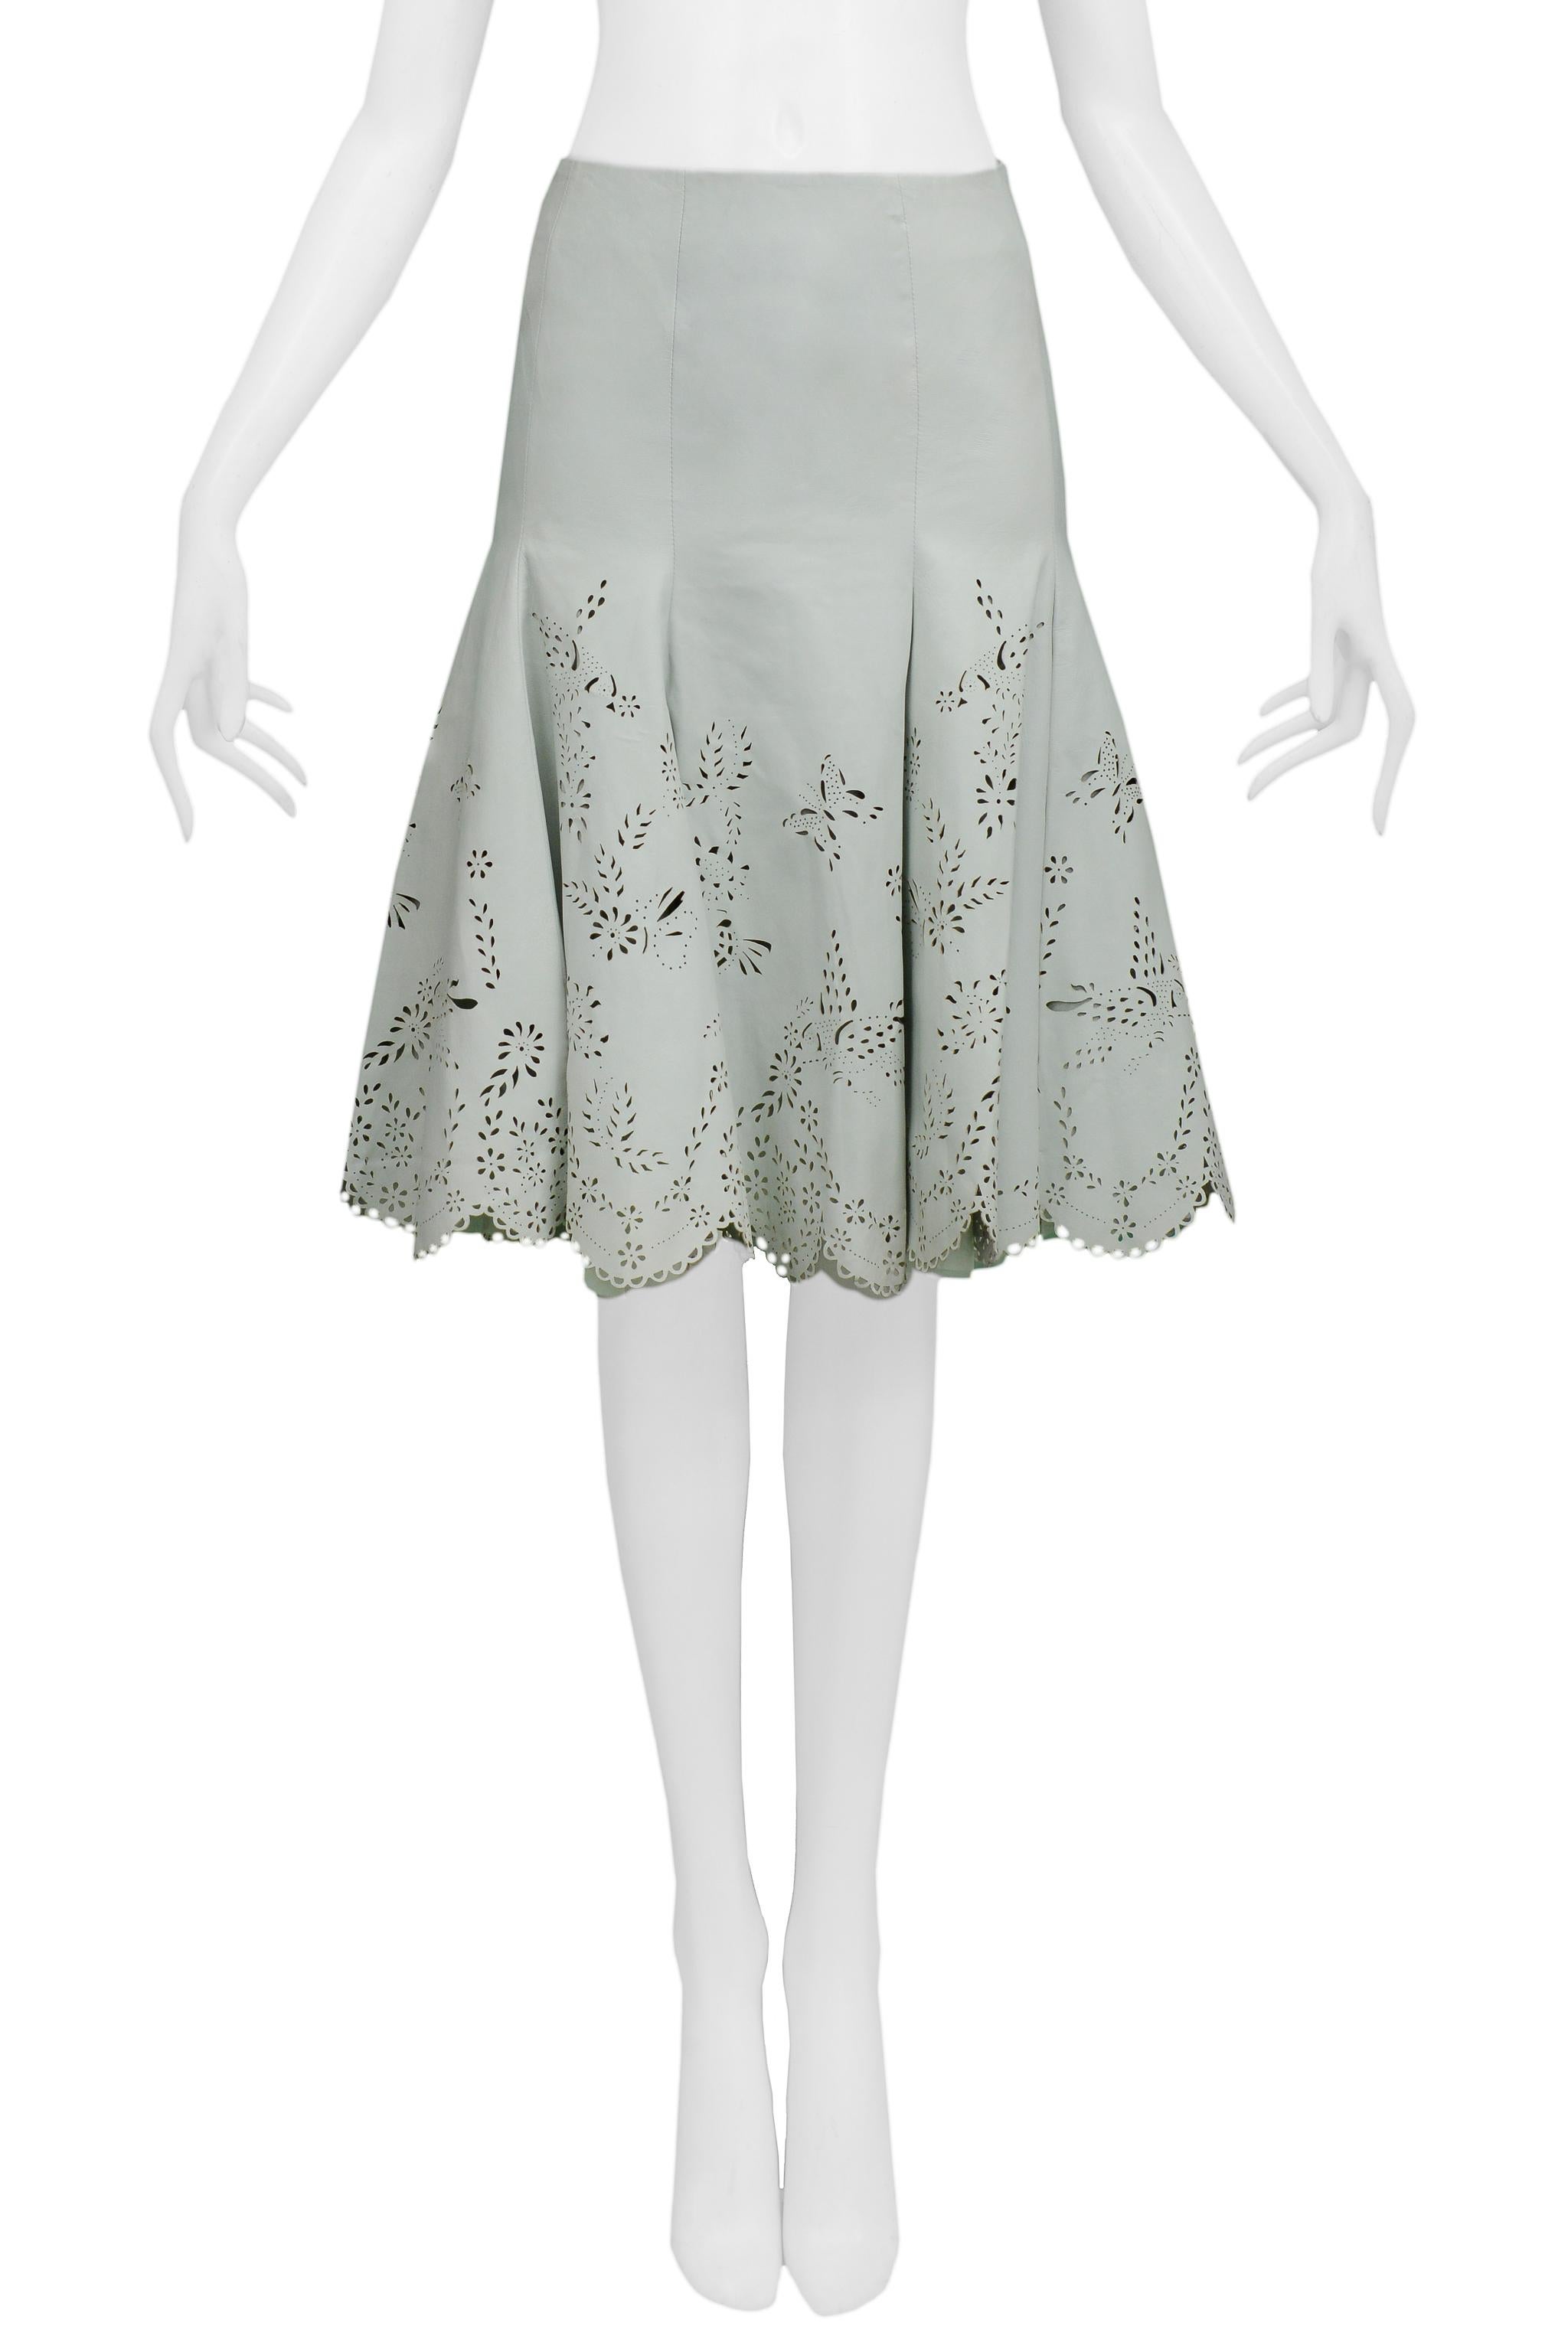 Resurrection is excited to offer a vintage Alexander McQueen light mint green leather skirt featuring laser-cut butterflies and leaves, scallop edge, and side zipper.

Alexander McQueen Label
Size 40
100% Leather
100% Silk Lining
2005 Collection